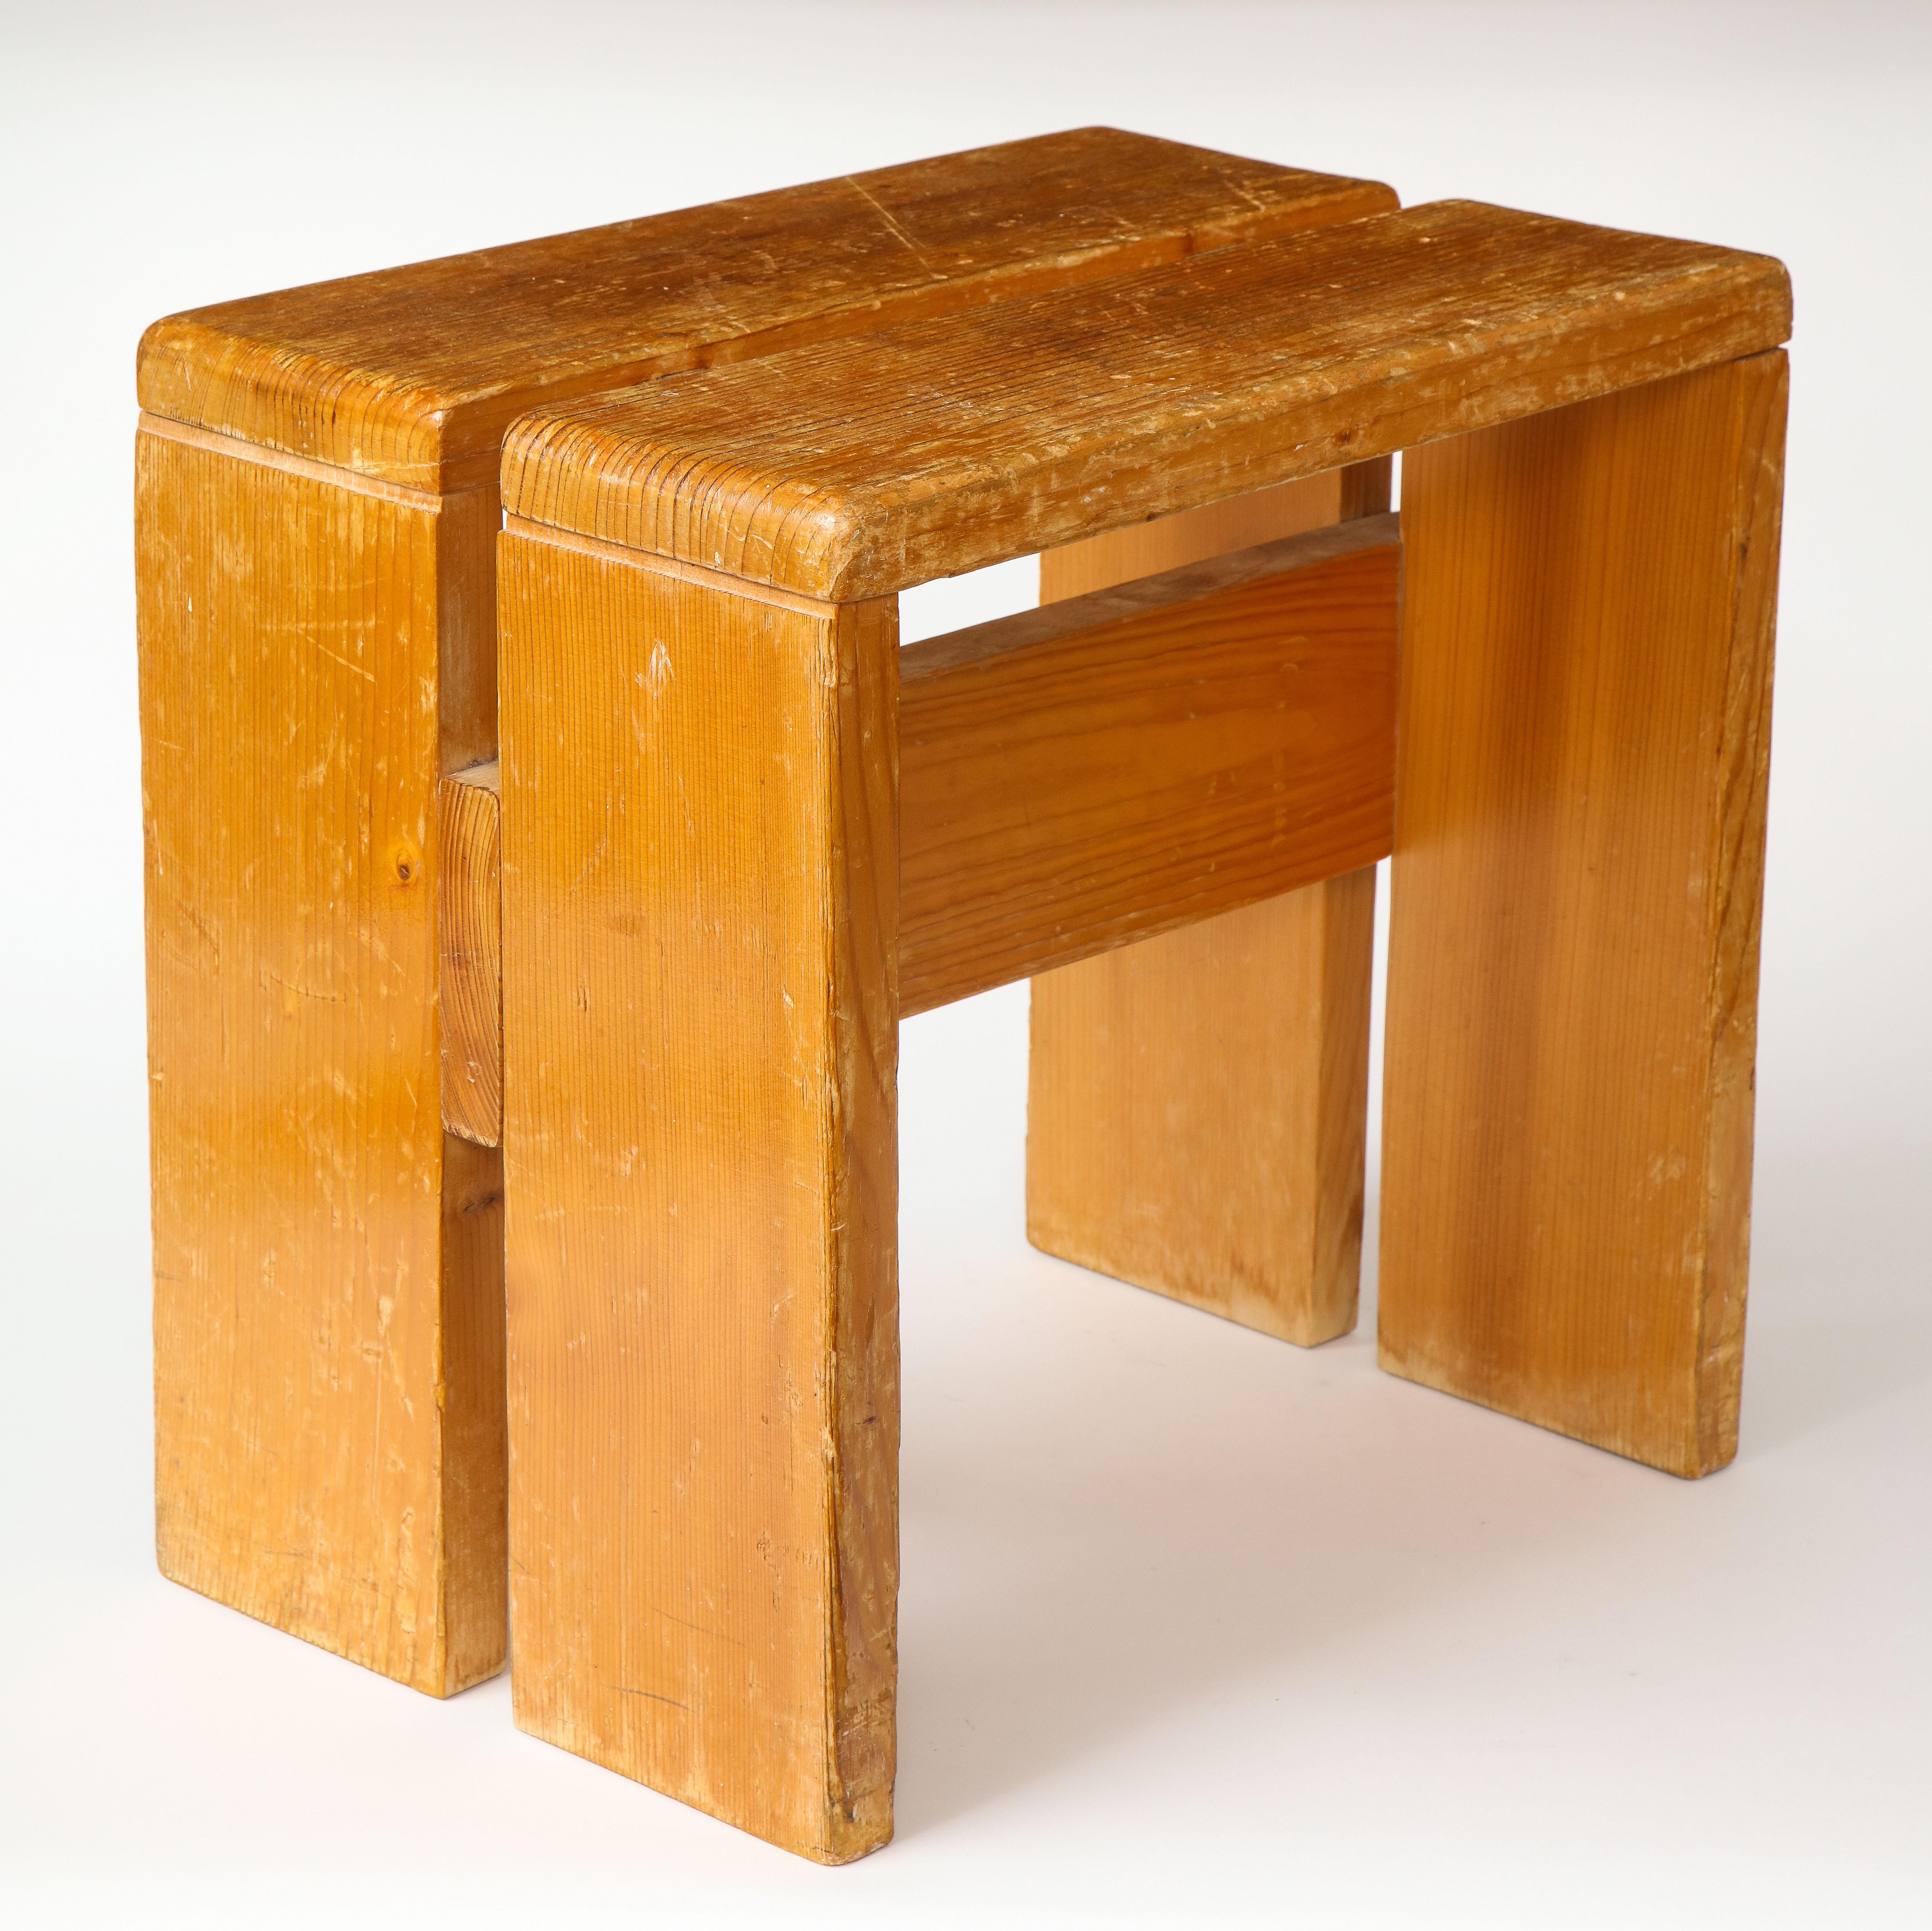 French Mid-Century Natural Pine Les Arcs Stools by Charlotte Perriand, France, c. 1960